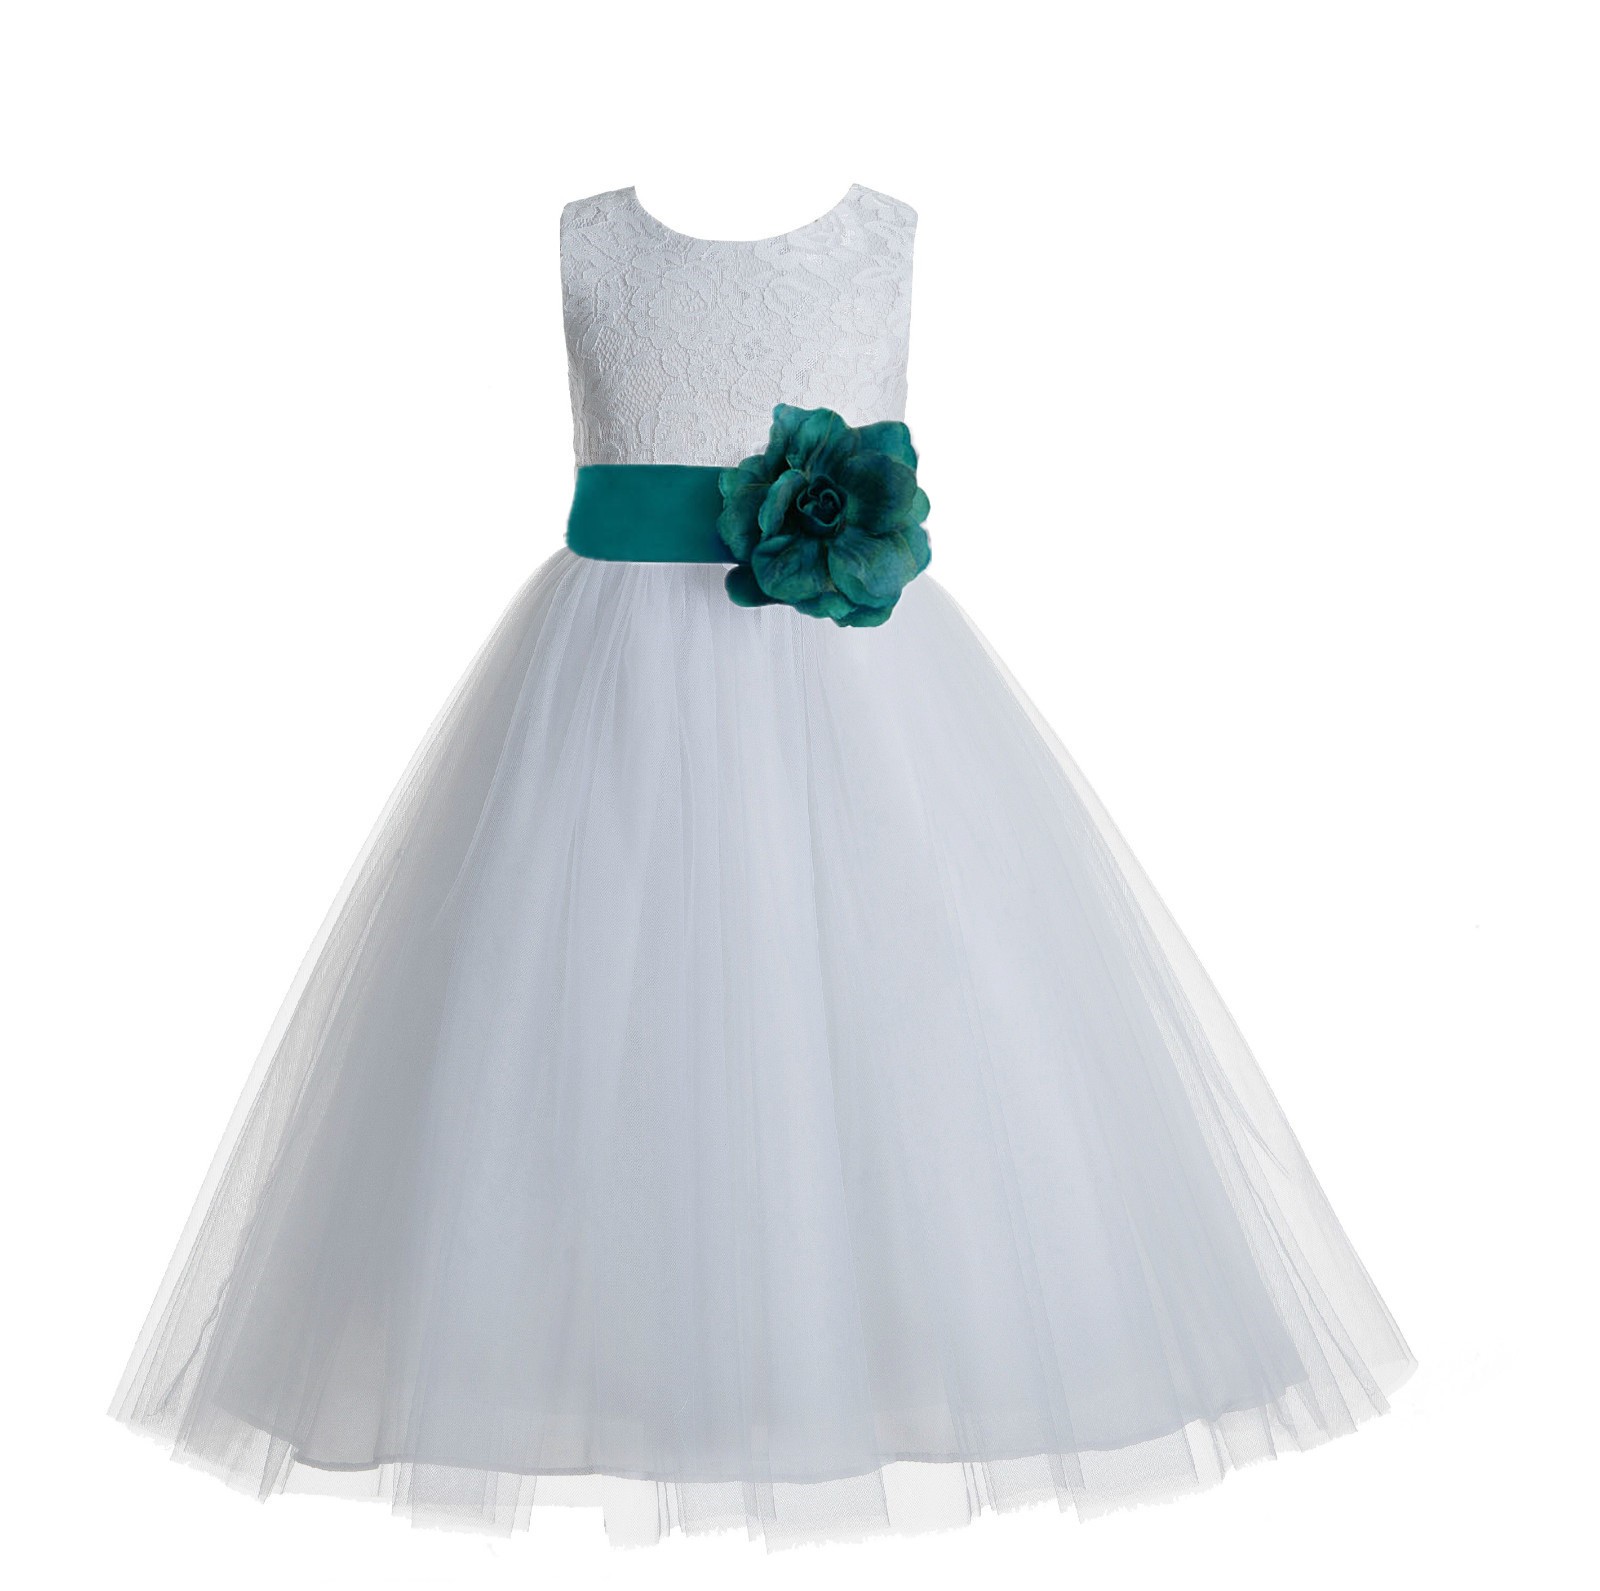 White / Oasis Floral Lace Heart Cutout Flower Girl Dress with Flower 172T